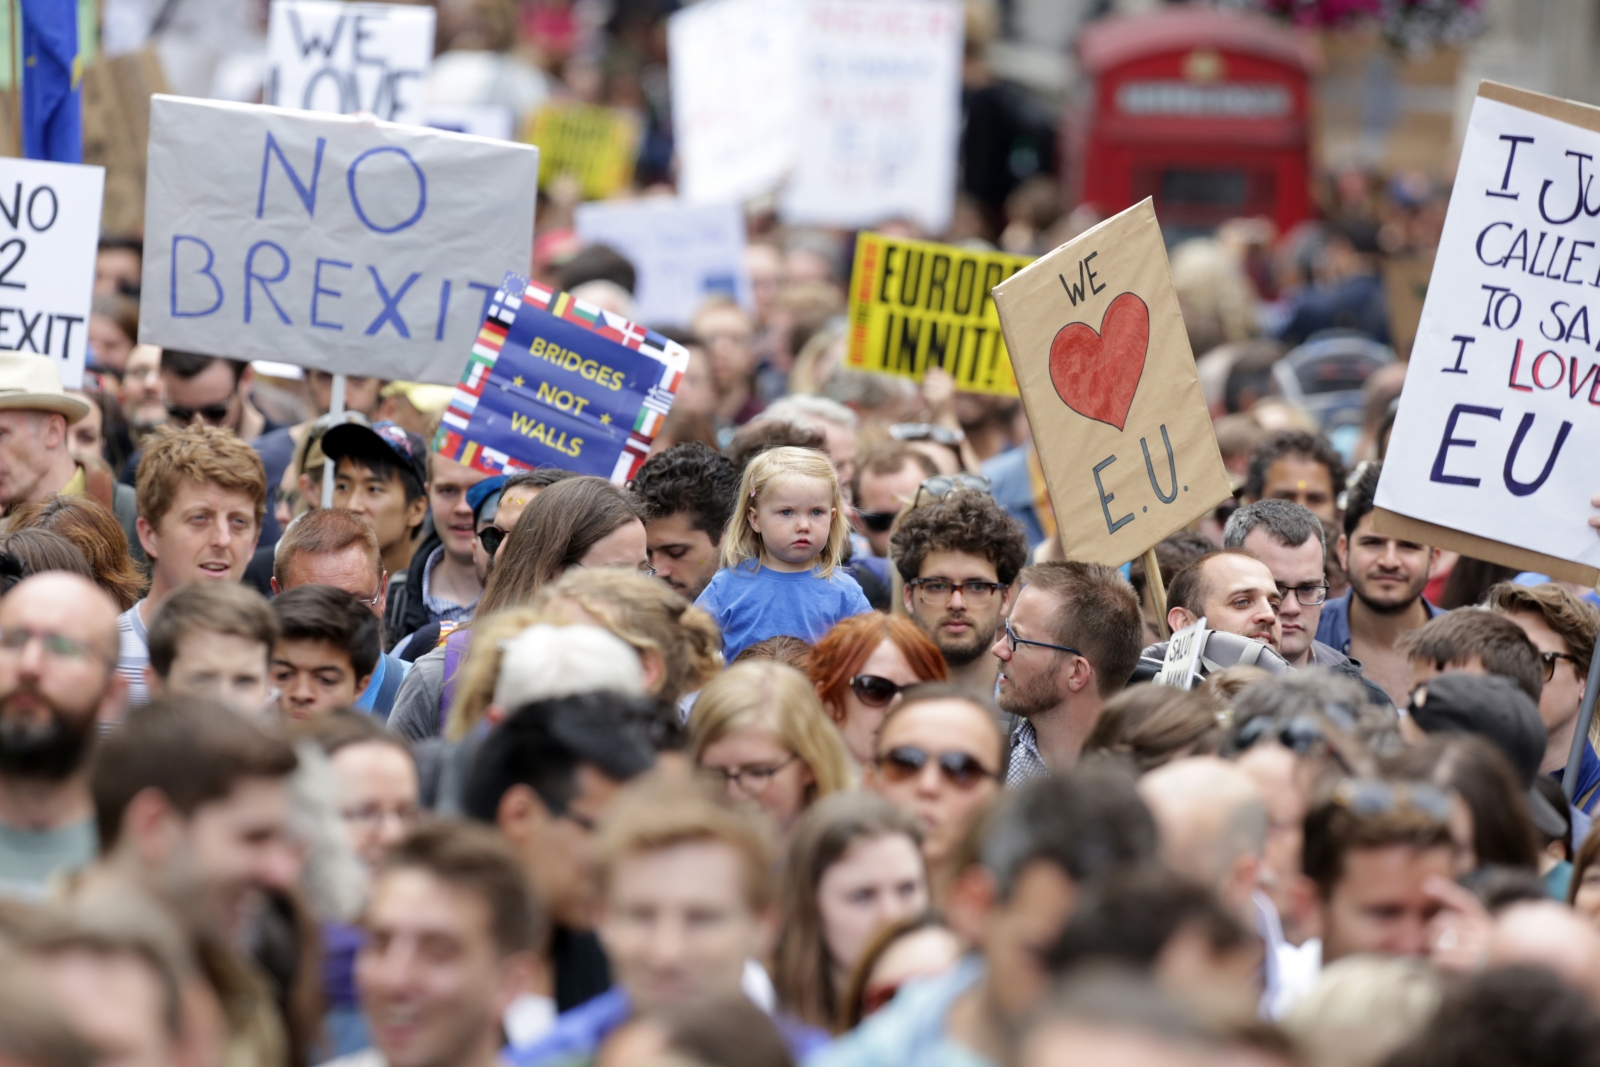 Massive proEU 'March for Europe' protest against Brexit in London